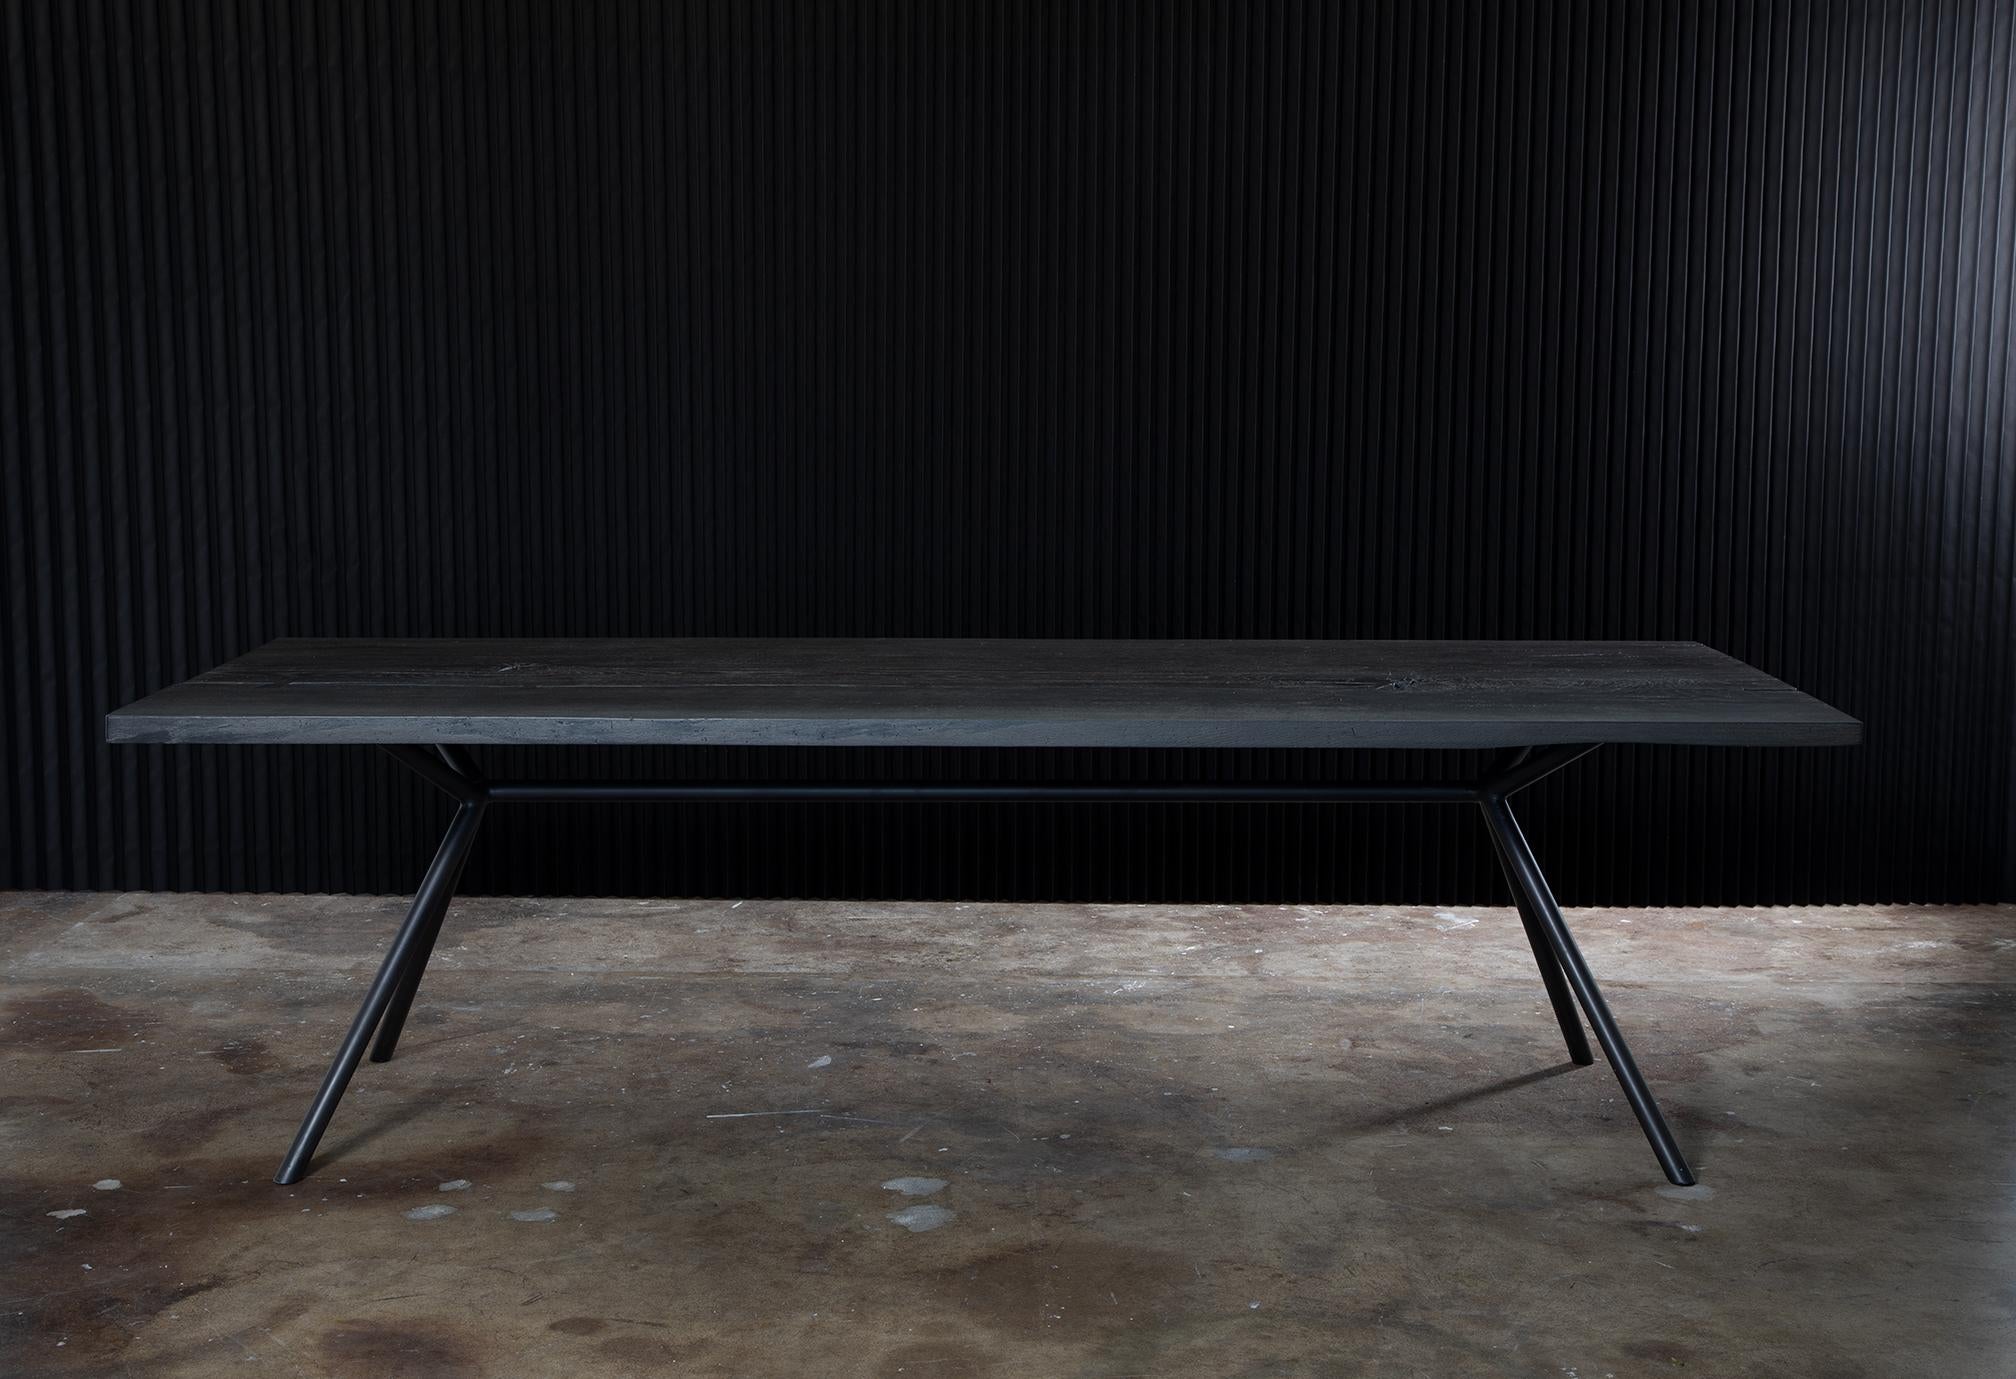 Inspired by Nicolas Andreas Taralis' wrapping and asymmetrical tailoring, the Andreas Dining Table has a dark edge to its minimal form. Sharp angles are in concert with ever-flowing lines, taking the eye beyond the table’s physical structure. The